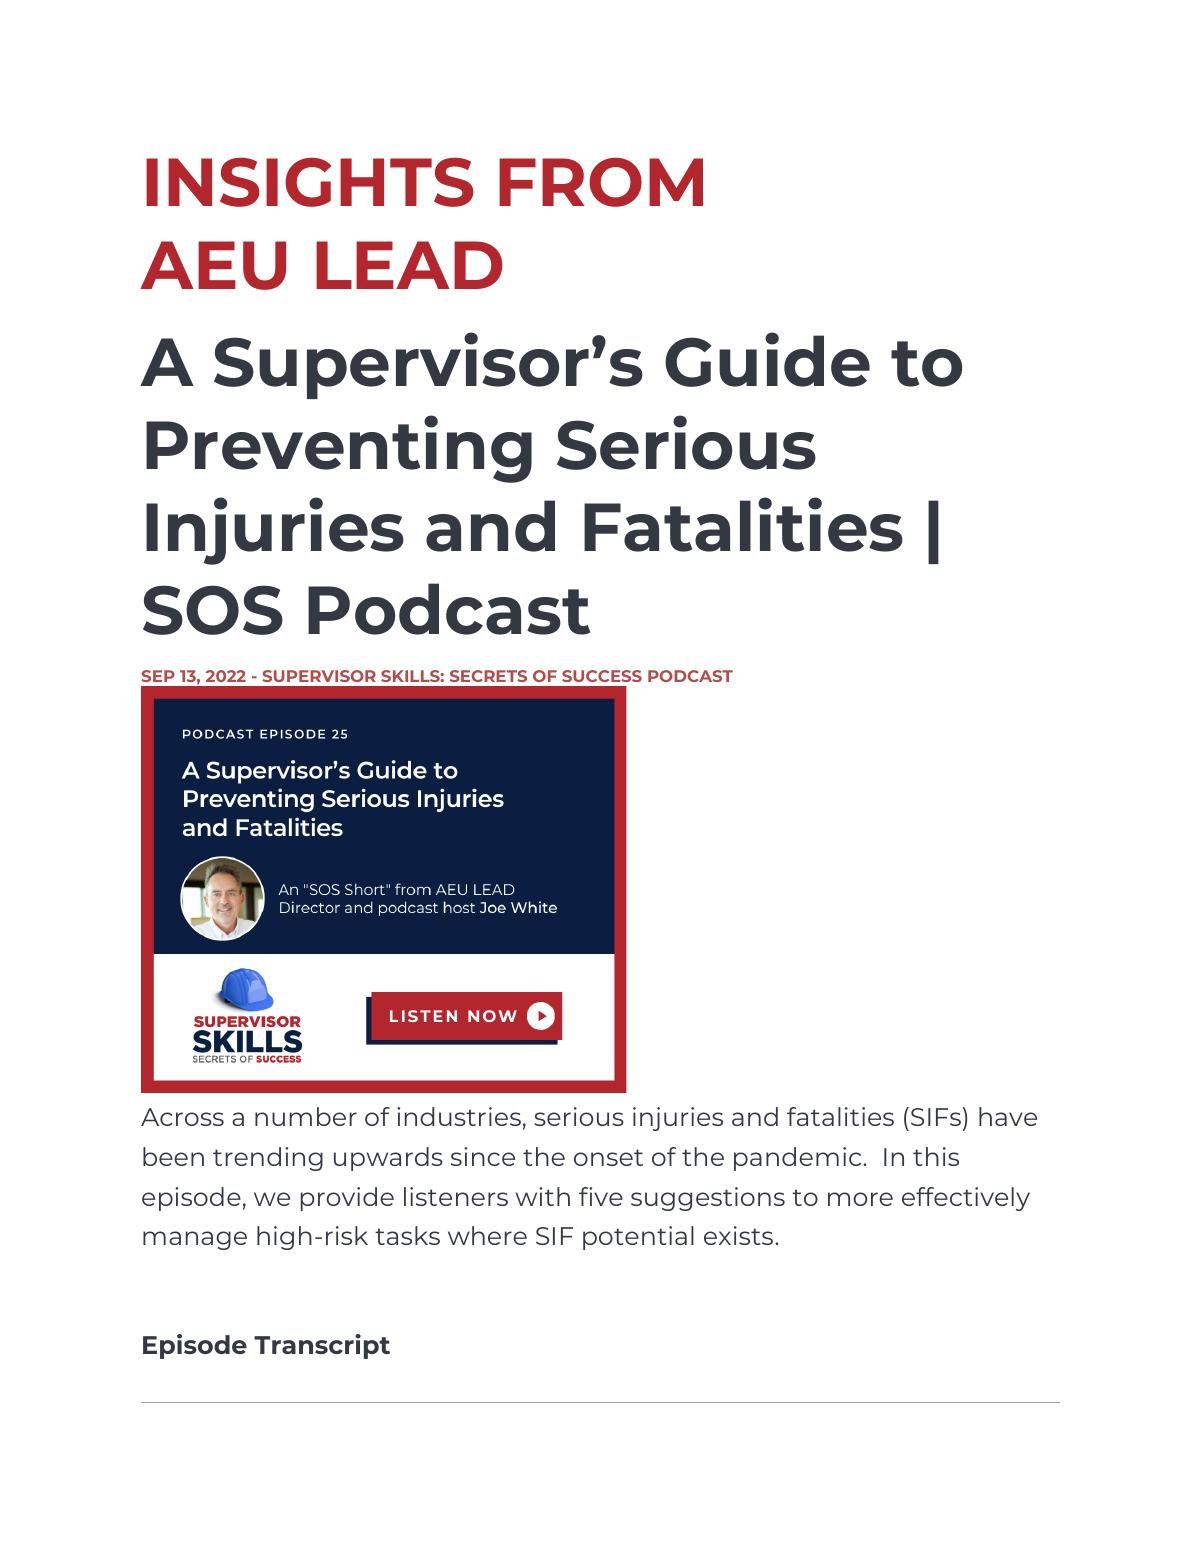 A Supervisor’s Guide to Preventing Serious Injuries and Fatalities | SOS Podcast